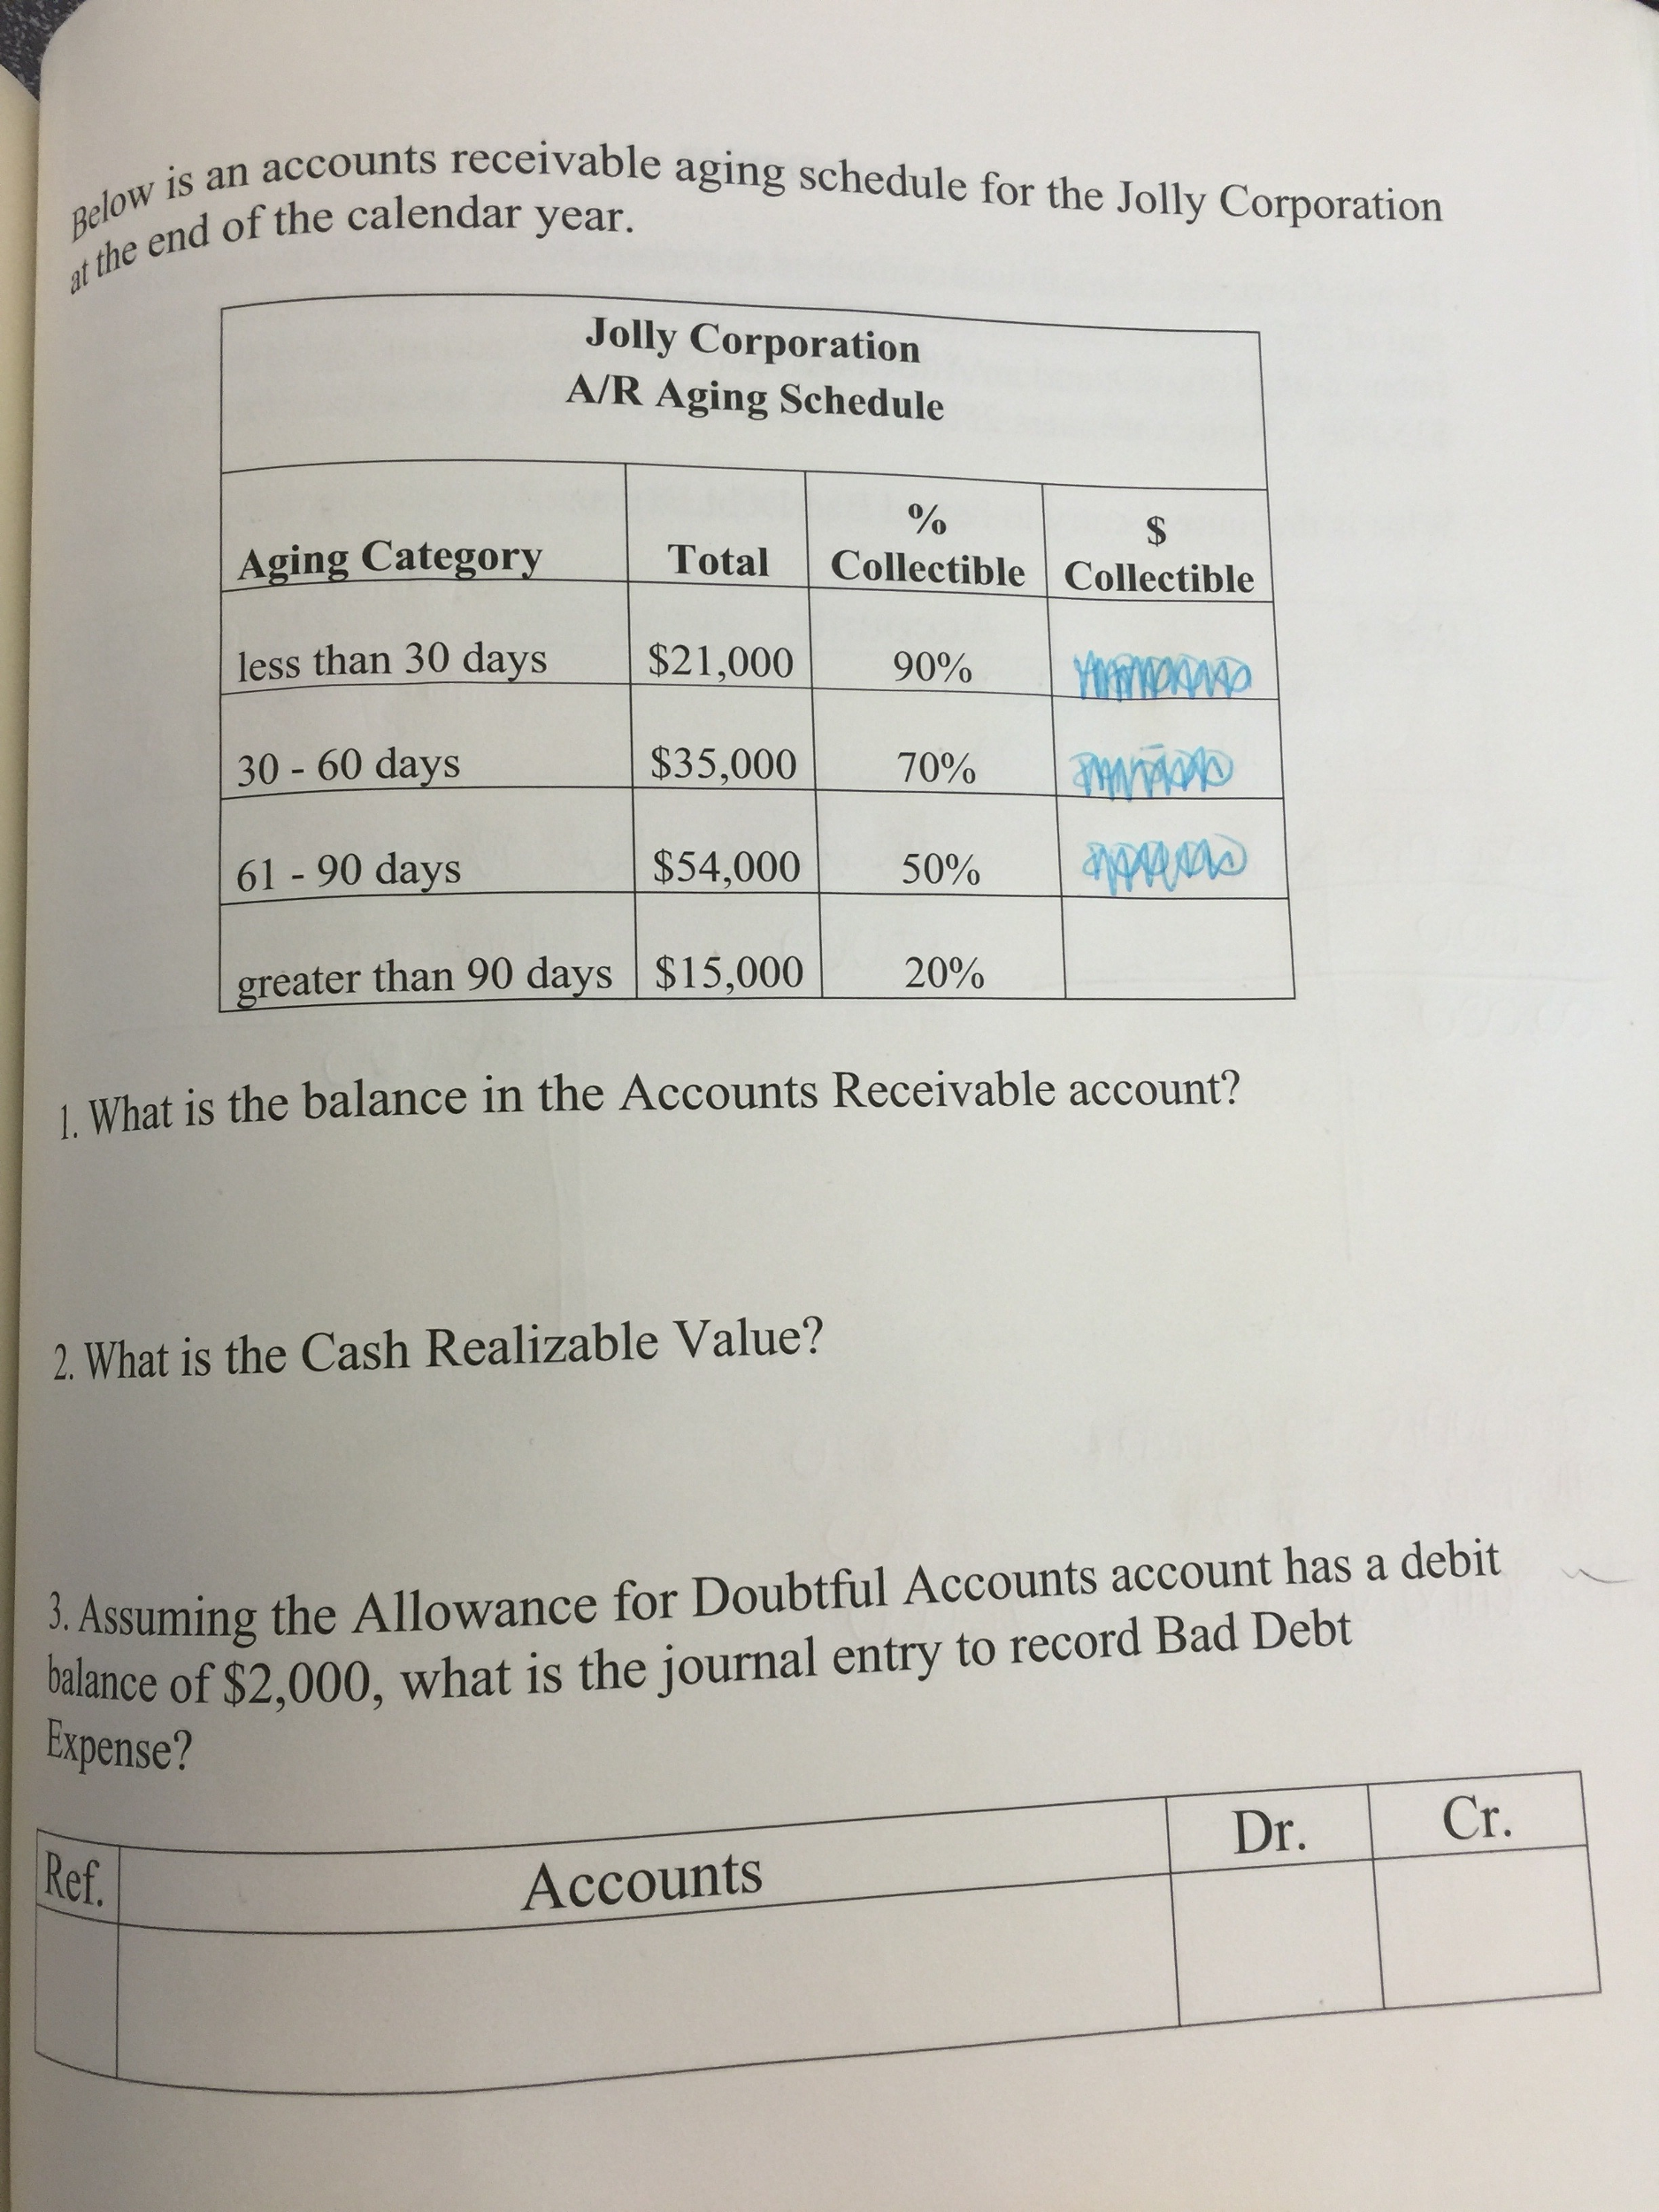 what is the ending balance of accounts receivable